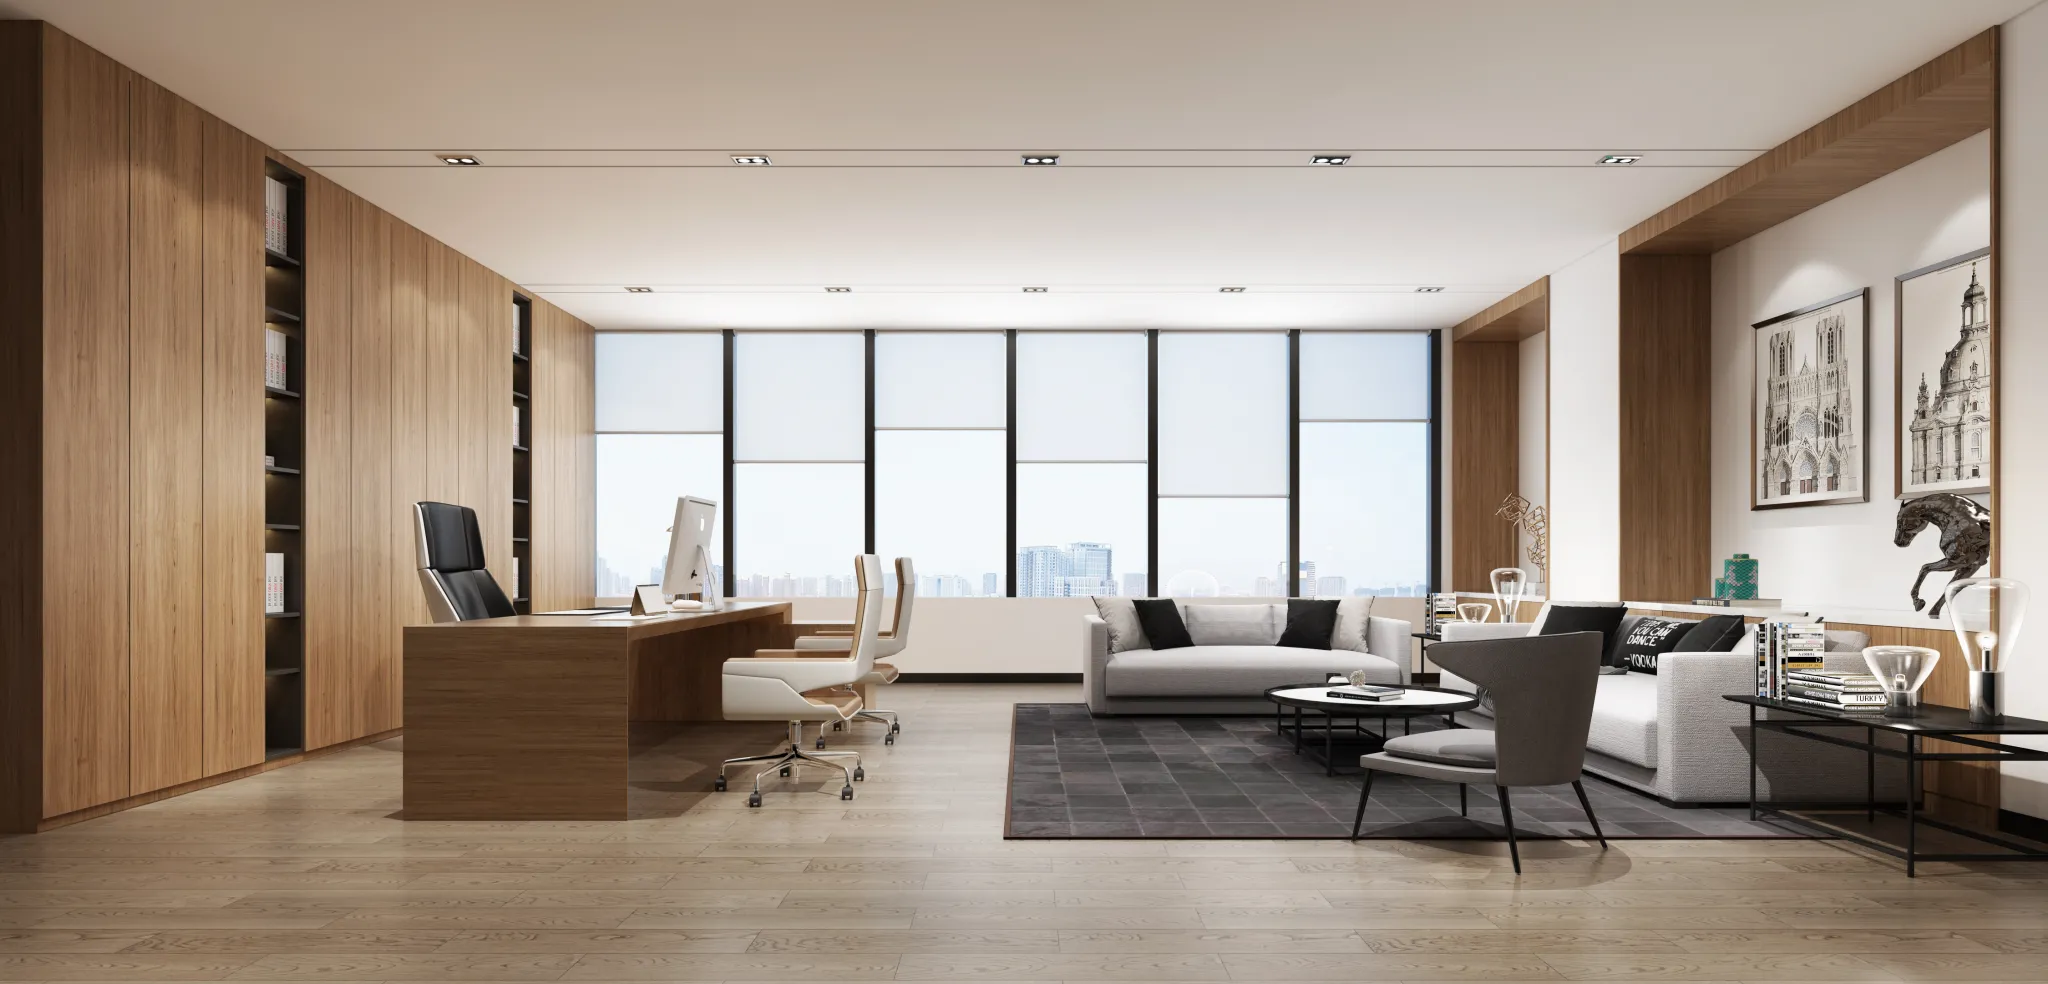 DESMOD INTERIOR 2021 (VRAY) – 24. MANAGER OFFICE – 008